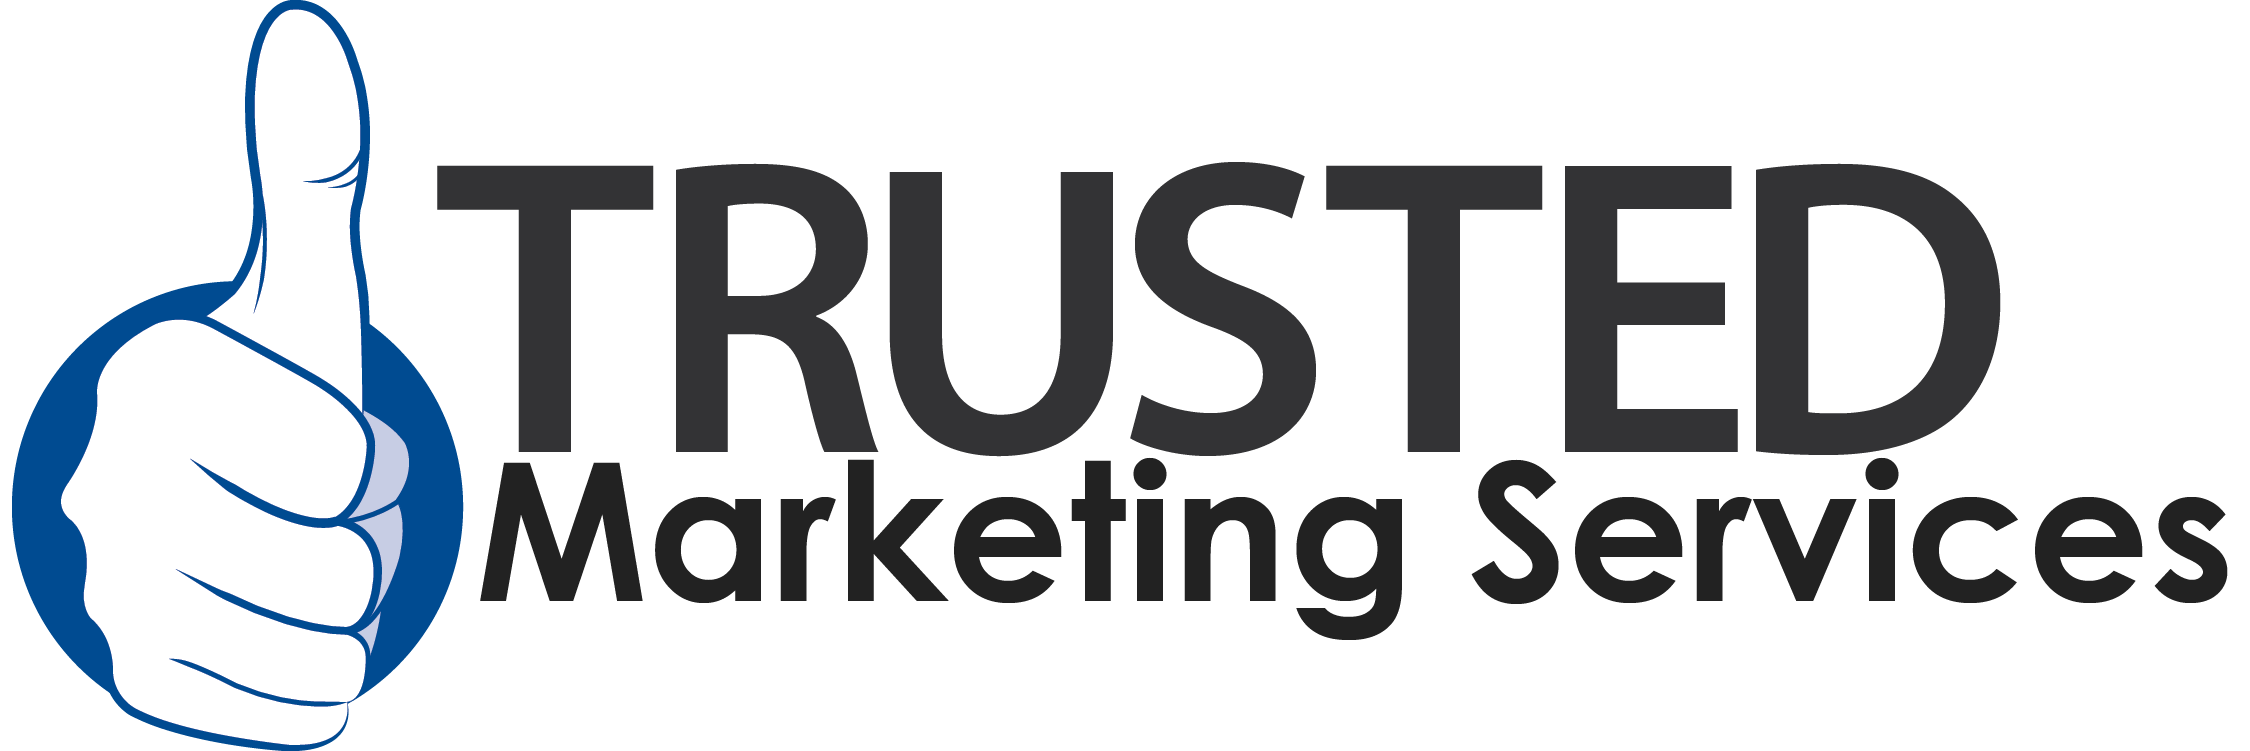 Trusted Marketing Services